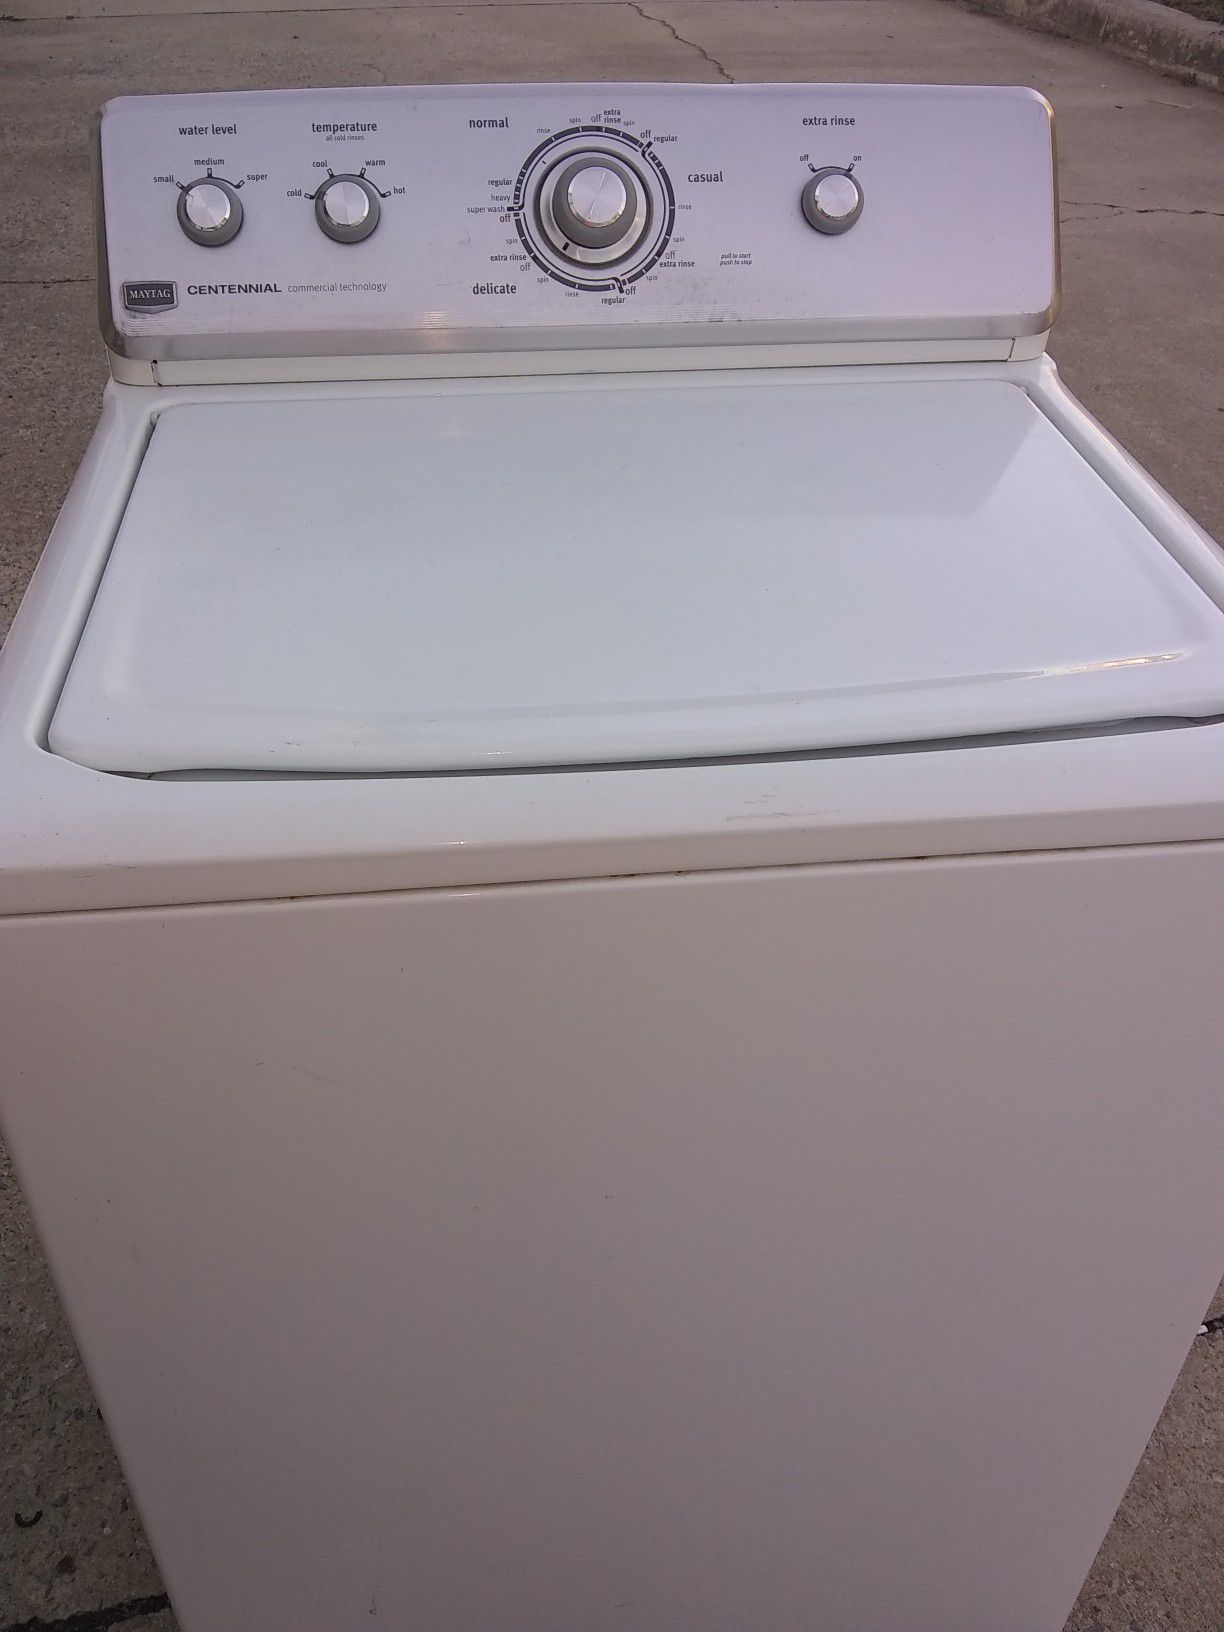 General electric washer ultra capacity heavy duty and ready for immediate use curbside delivery or pickup